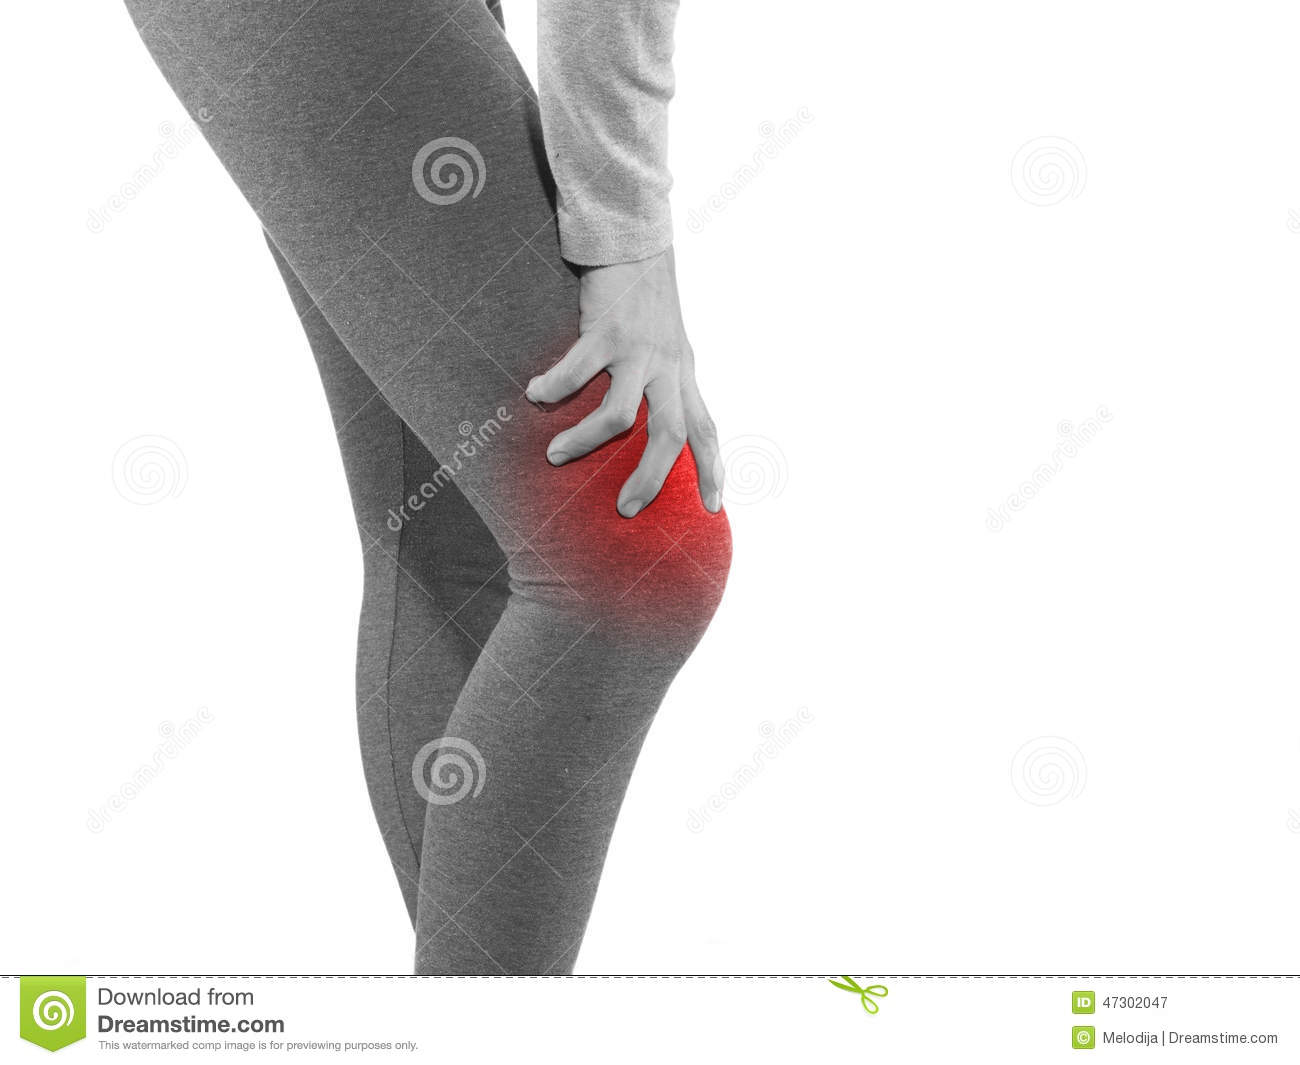 Human Knee Pain With An Anatomy Injury Caused By Sports Accident Or